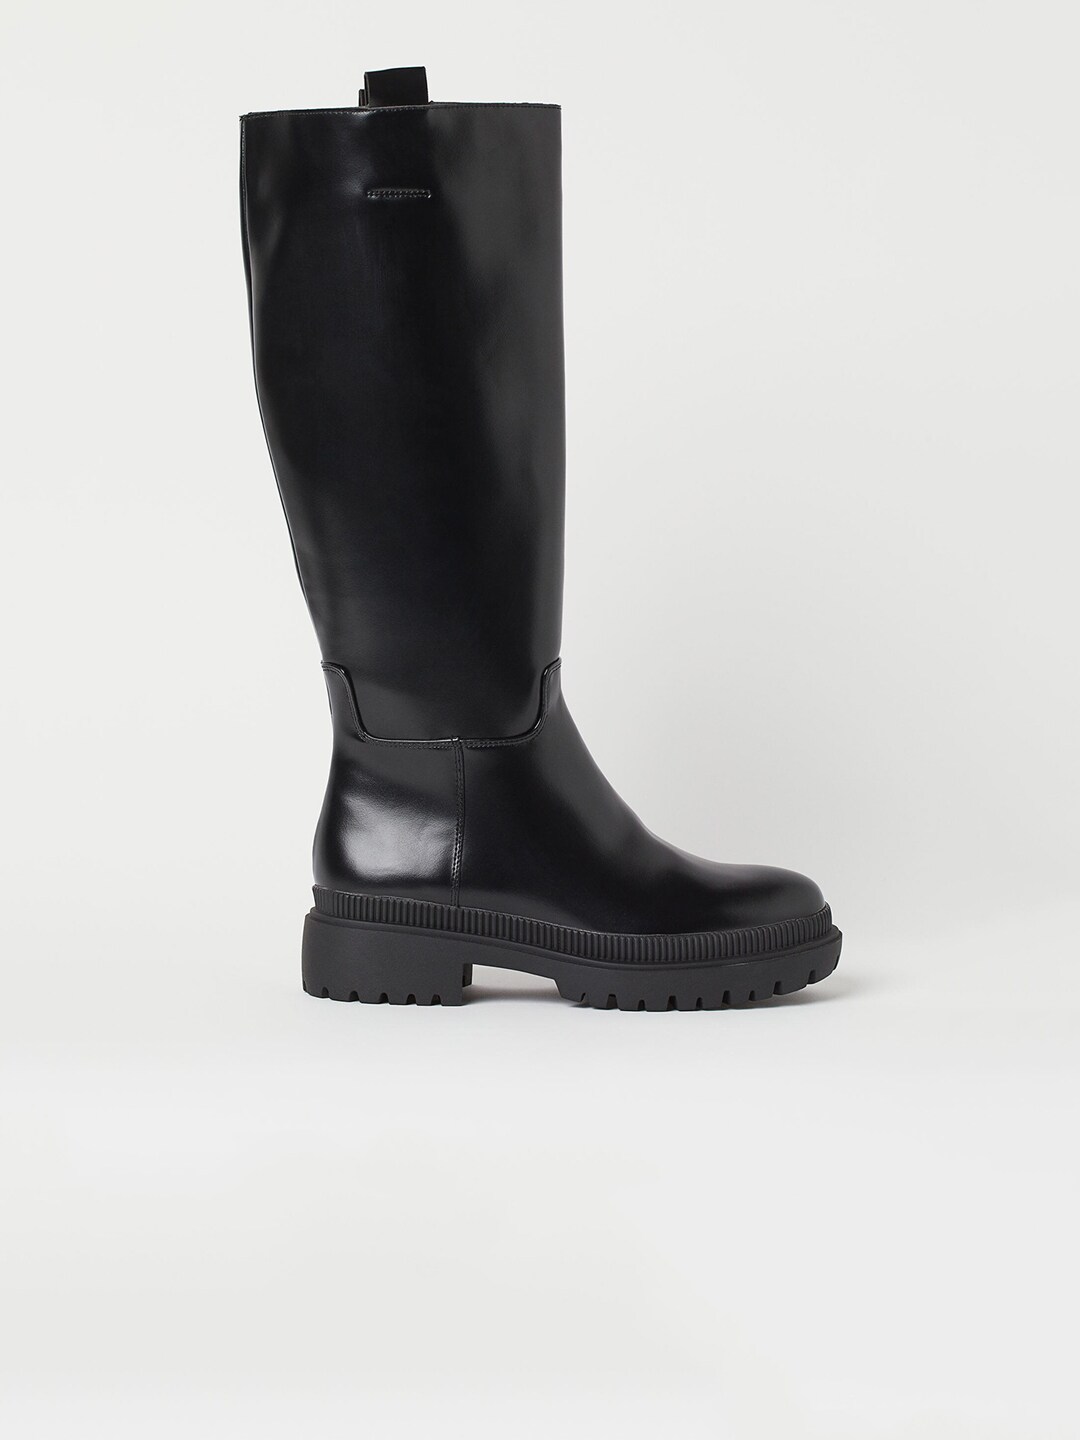 H&M Women Black Knee-High Boots Price in India